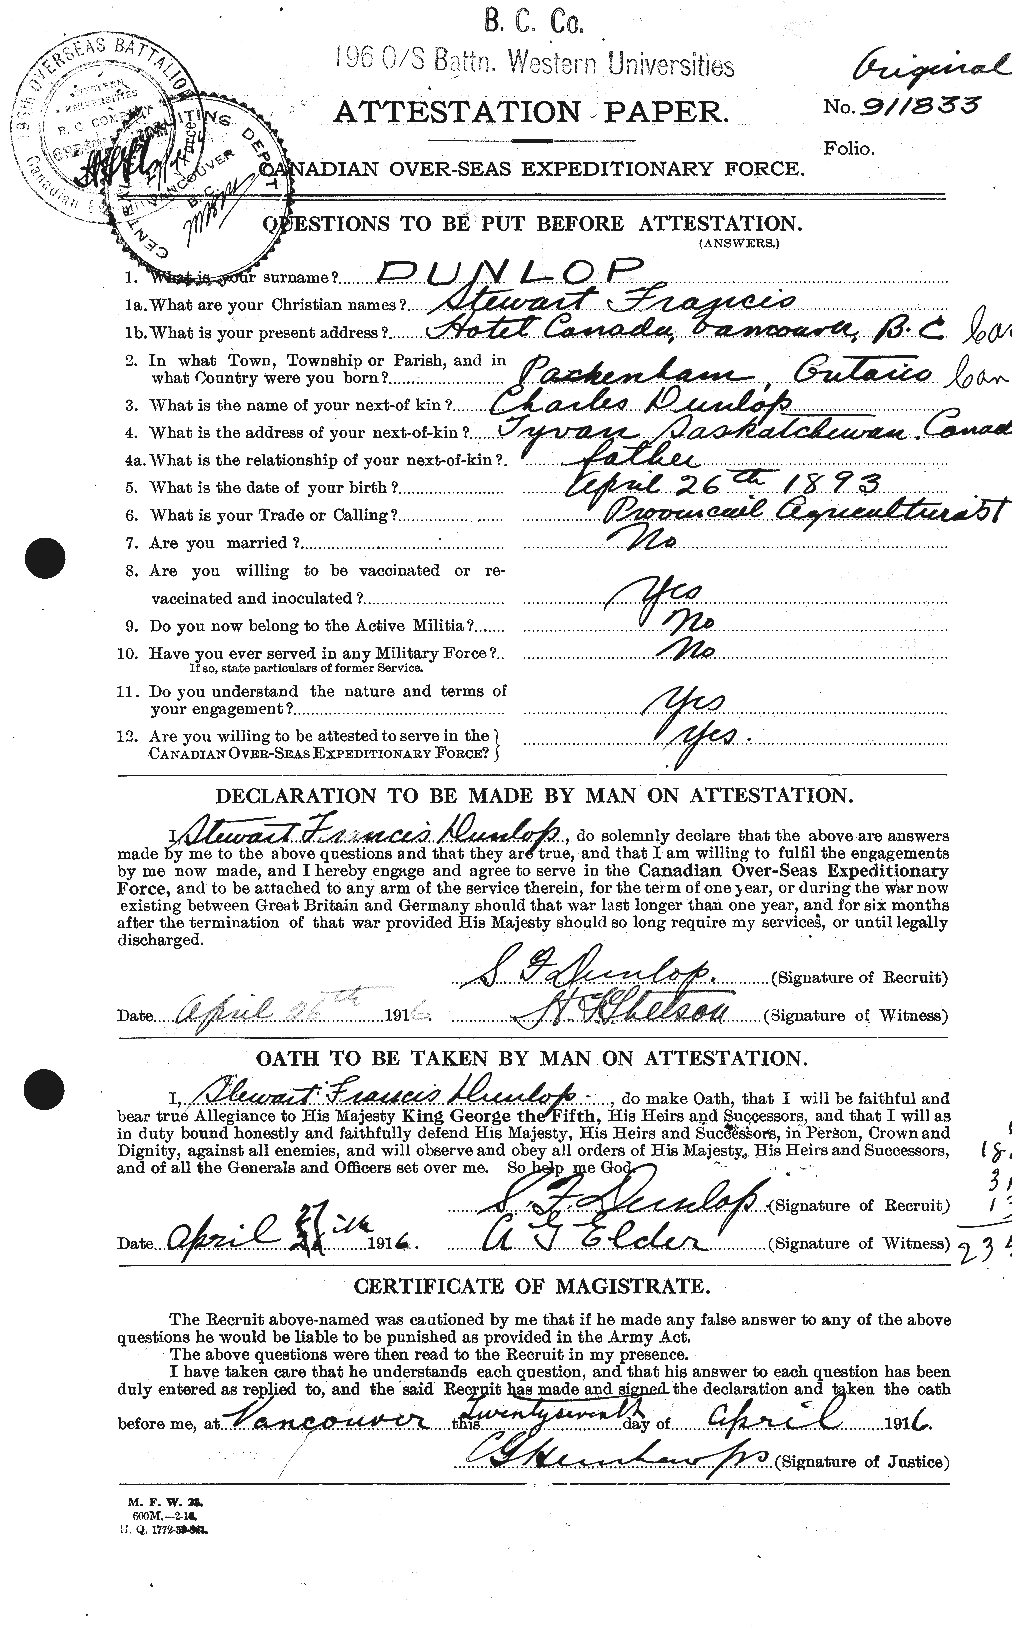 Personnel Records of the First World War - CEF 303885a